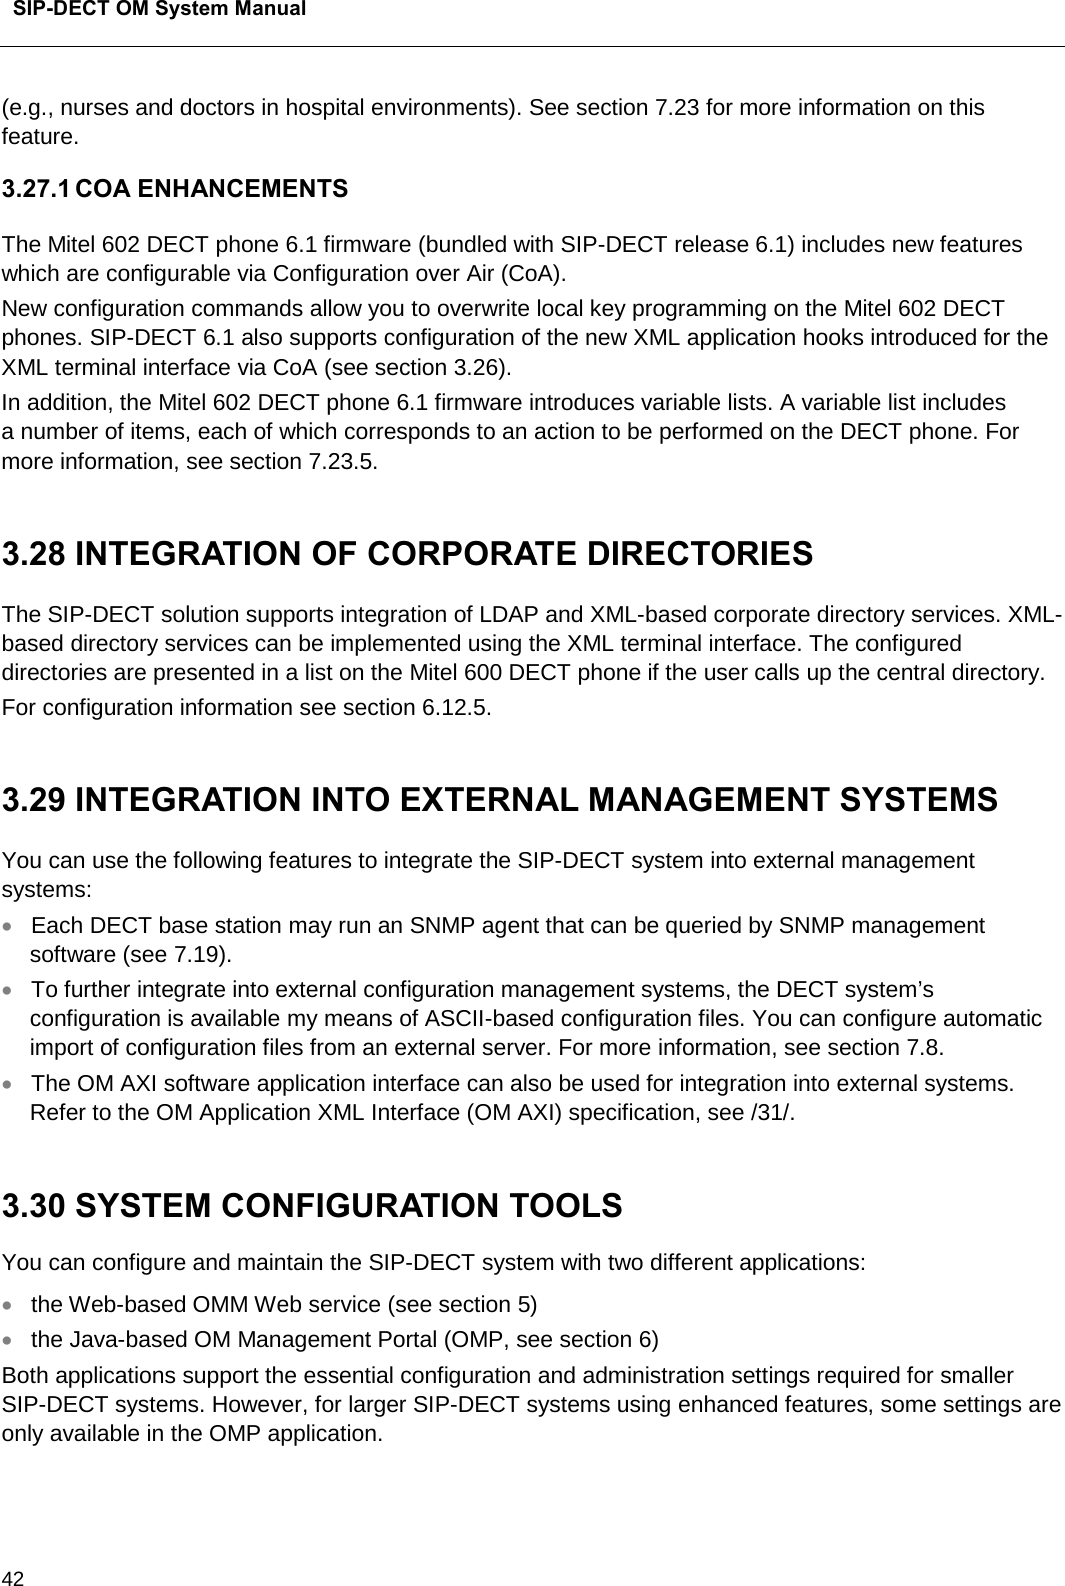  SIP-DECT OM System Manual    42 (e.g., nurses and doctors in hospital environments). See section 7.23 for more information on this feature. 3.27.1 COA ENHANCEMENTS The Mitel 602 DECT phone 6.1 firmware (bundled with SIP-DECT release 6.1) includes new features which are configurable via Configuration over Air (CoA). New configuration commands allow you to overwrite local key programming on the Mitel 602 DECT phones. SIP-DECT 6.1 also supports configuration of the new XML application hooks introduced for the XML terminal interface via CoA (see section 3.26). In addition, the Mitel 602 DECT phone 6.1 firmware introduces variable lists. A variable list includes  a number of items, each of which corresponds to an action to be performed on the DECT phone. For more information, see section 7.23.5.  3.28 INTEGRATION OF CORPORATE DIRECTORIES  The SIP-DECT solution supports integration of LDAP and XML-based corporate directory services. XML-based directory services can be implemented using the XML terminal interface. The configured directories are presented in a list on the Mitel 600 DECT phone if the user calls up the central directory.  For configuration information see section 6.12.5.   3.29 INTEGRATION INTO EXTERNAL MANAGEMENT SYSTEMS You can use the following features to integrate the SIP-DECT system into external management systems: • Each DECT base station may run an SNMP agent that can be queried by SNMP management software (see 7.19).  • To further integrate into external configuration management systems, the DECT system’s configuration is available my means of ASCII-based configuration files. You can configure automatic import of configuration files from an external server. For more information, see section 7.8. • The OM AXI software application interface can also be used for integration into external systems. Refer to the OM Application XML Interface (OM AXI) specification, see /31/.  3.30 SYSTEM CONFIGURATION TOOLS You can configure and maintain the SIP-DECT system with two different applications: • the Web-based OMM Web service (see section 5)  • the Java-based OM Management Portal (OMP, see section 6) Both applications support the essential configuration and administration settings required for smaller SIP-DECT systems. However, for larger SIP-DECT systems using enhanced features, some settings are only available in the OMP application.    